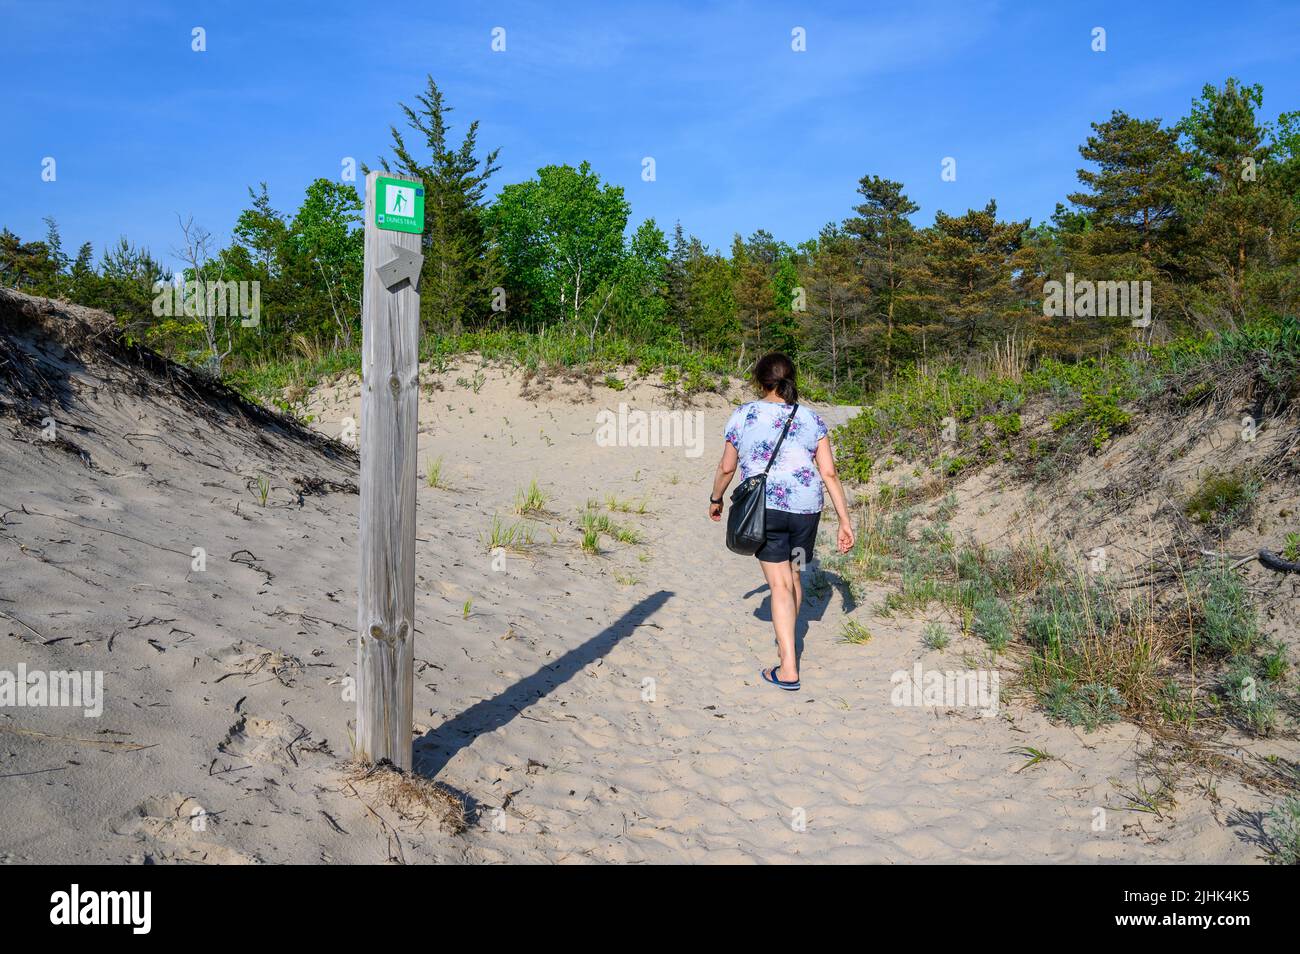 Middle-aged woman of Indian descent walks along Dunes Trail at Sandbanks Dunes Beach, Prince Edward County, Ontario, Canada. Stock Photo